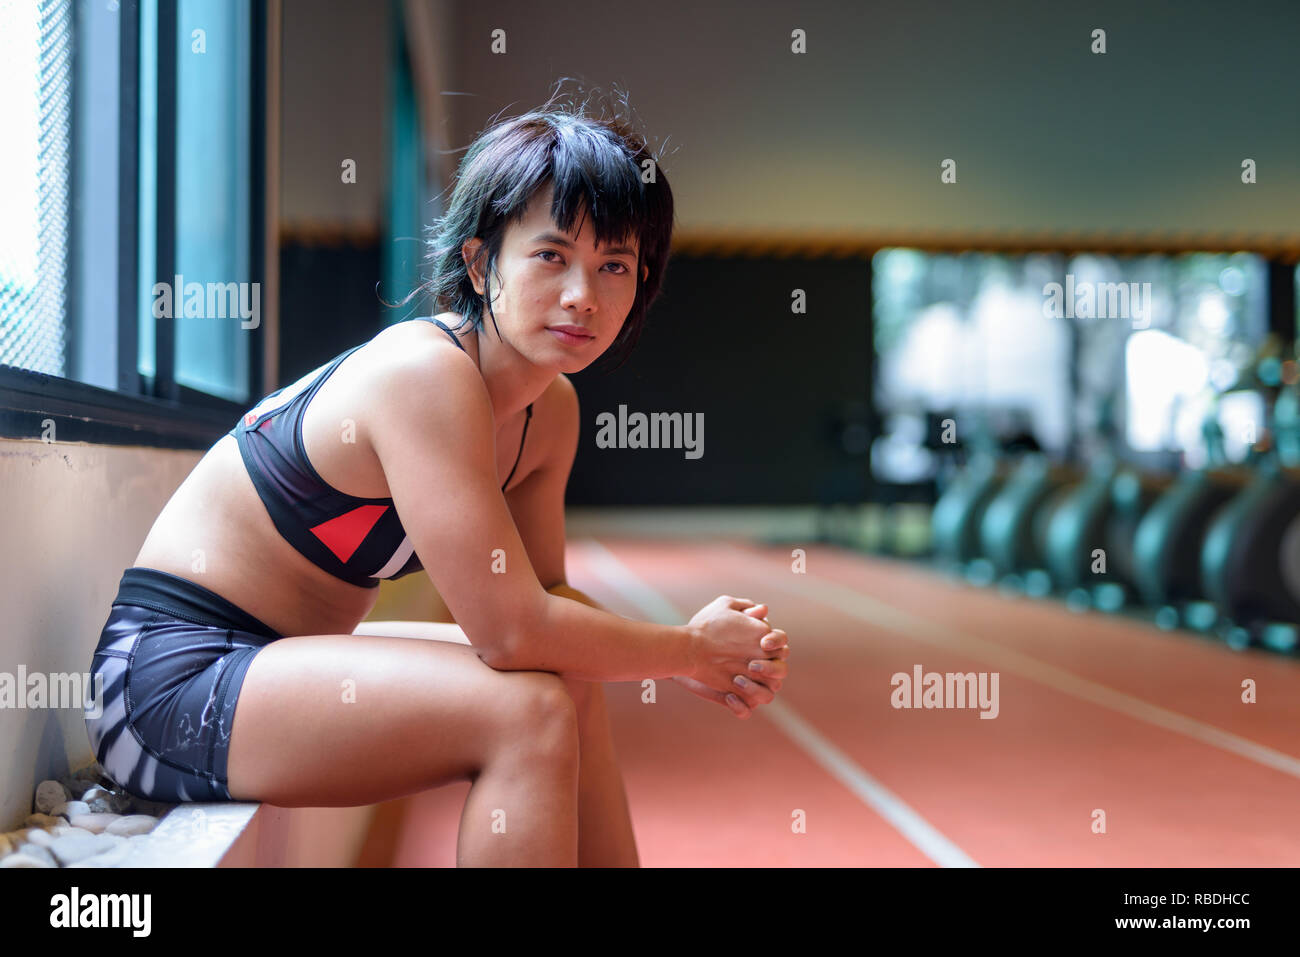 Young beautiful Asian woman sitting and relaxing at the gym Stock Photo